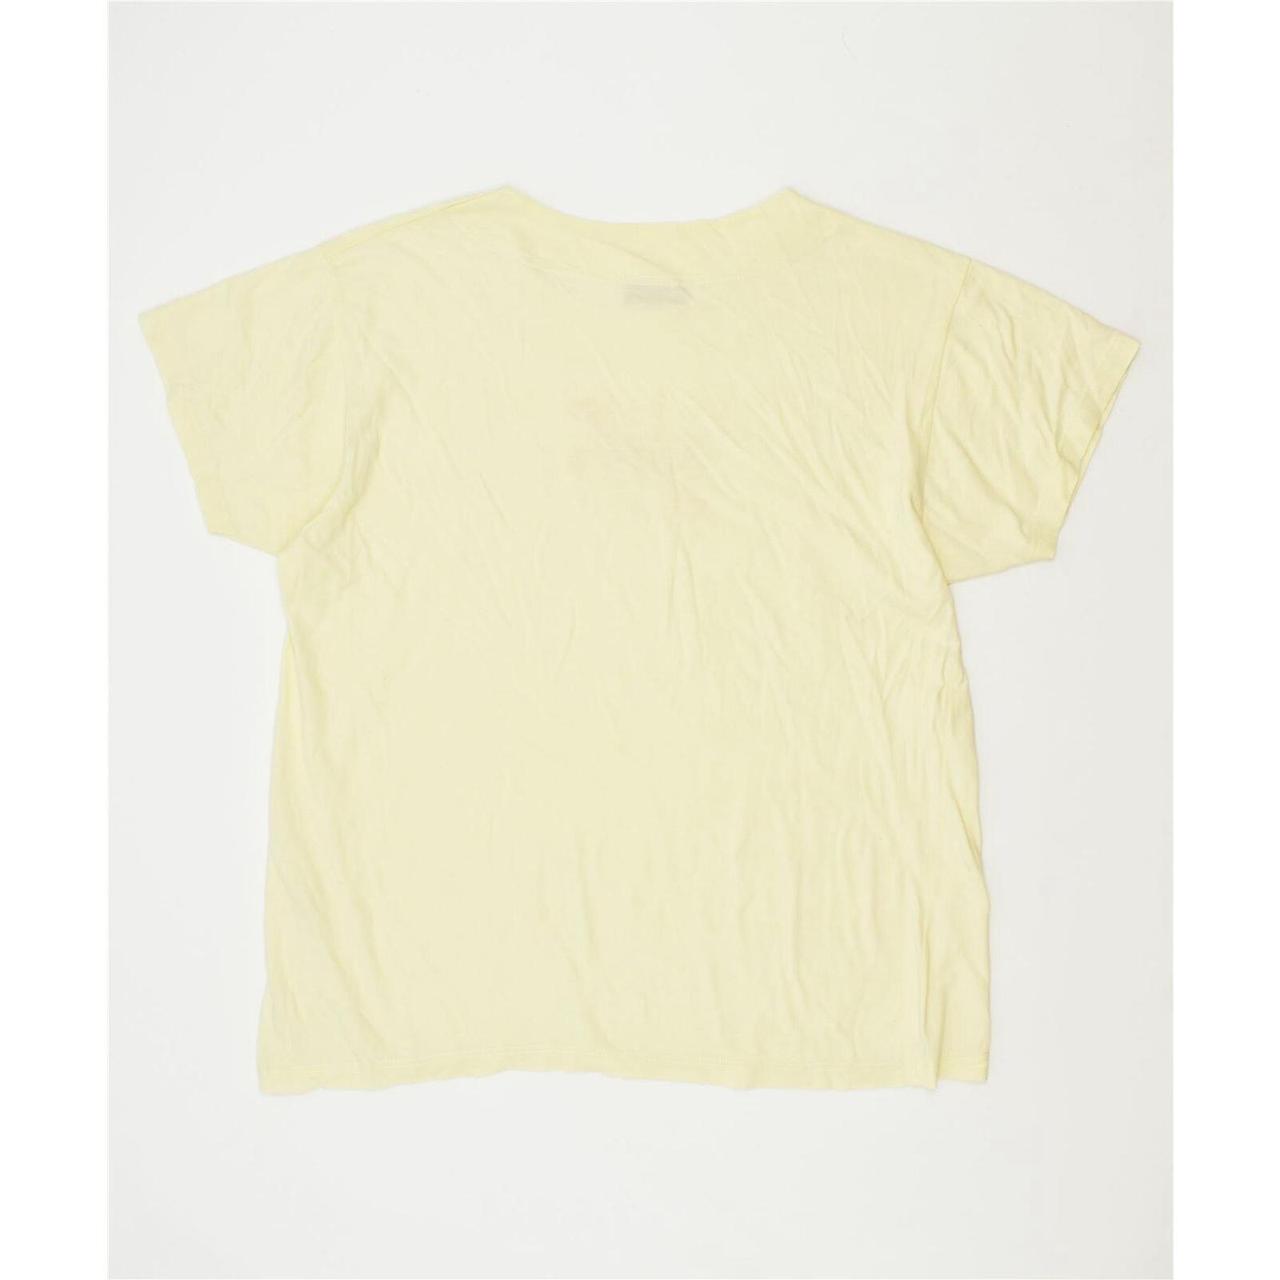 Product Image 2 - DONNA Womens Graphic T-Shirt Top